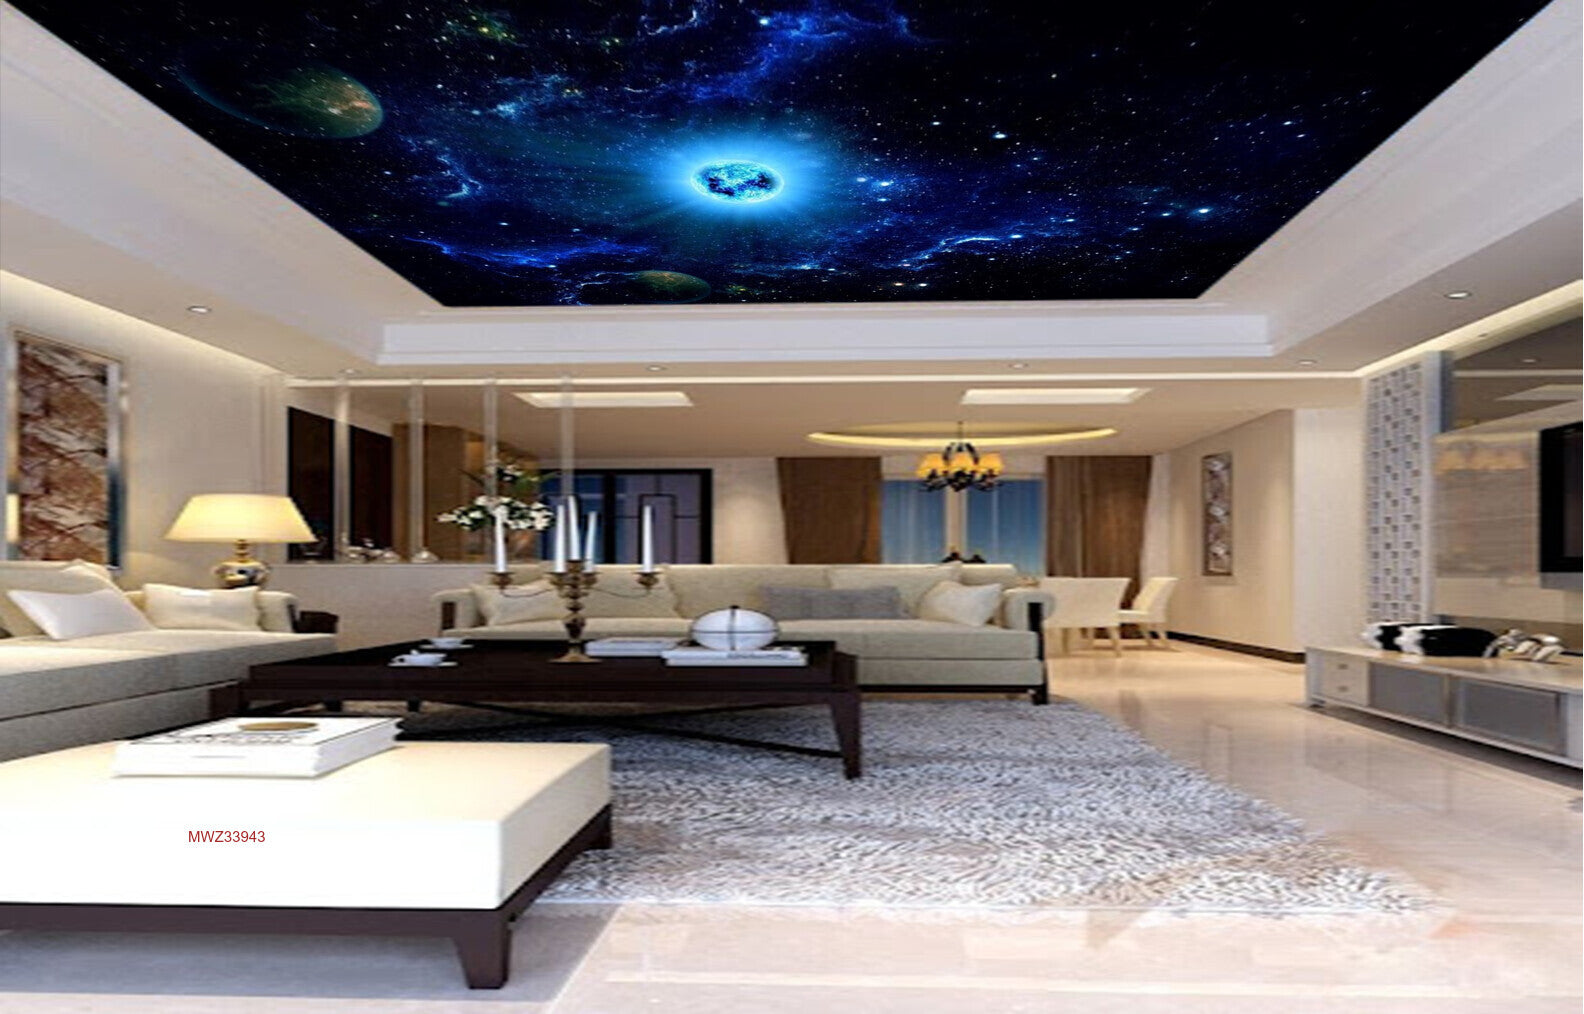 Avikalp MWZ3394 Space Planets Stars HD Wallpaper for Ceiling